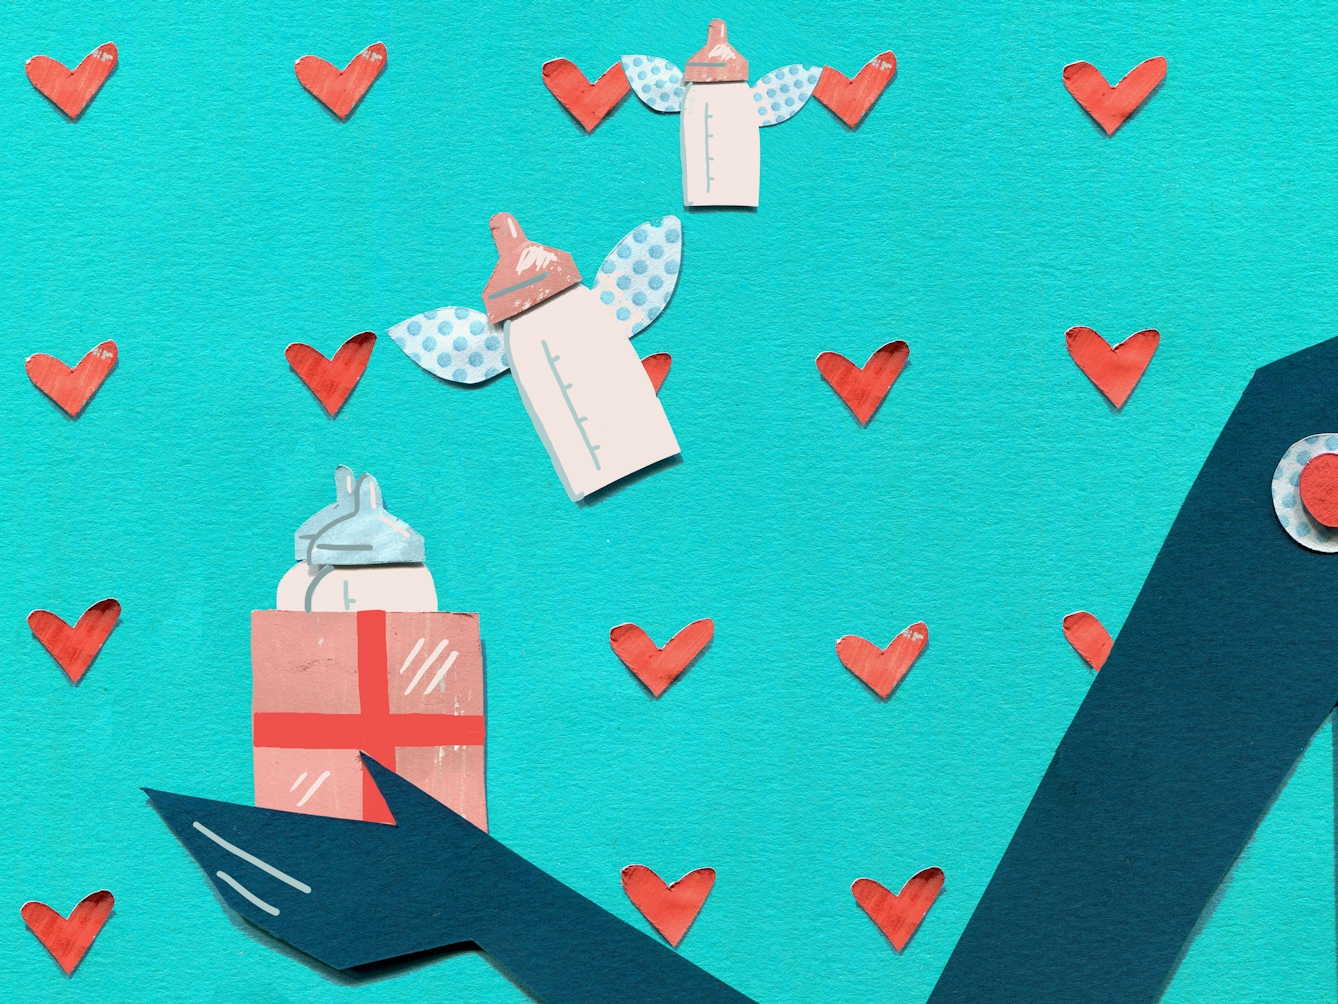 A mixed media illustration depicting baby bottles, some of which have wings and are flying amongst small red hearts.